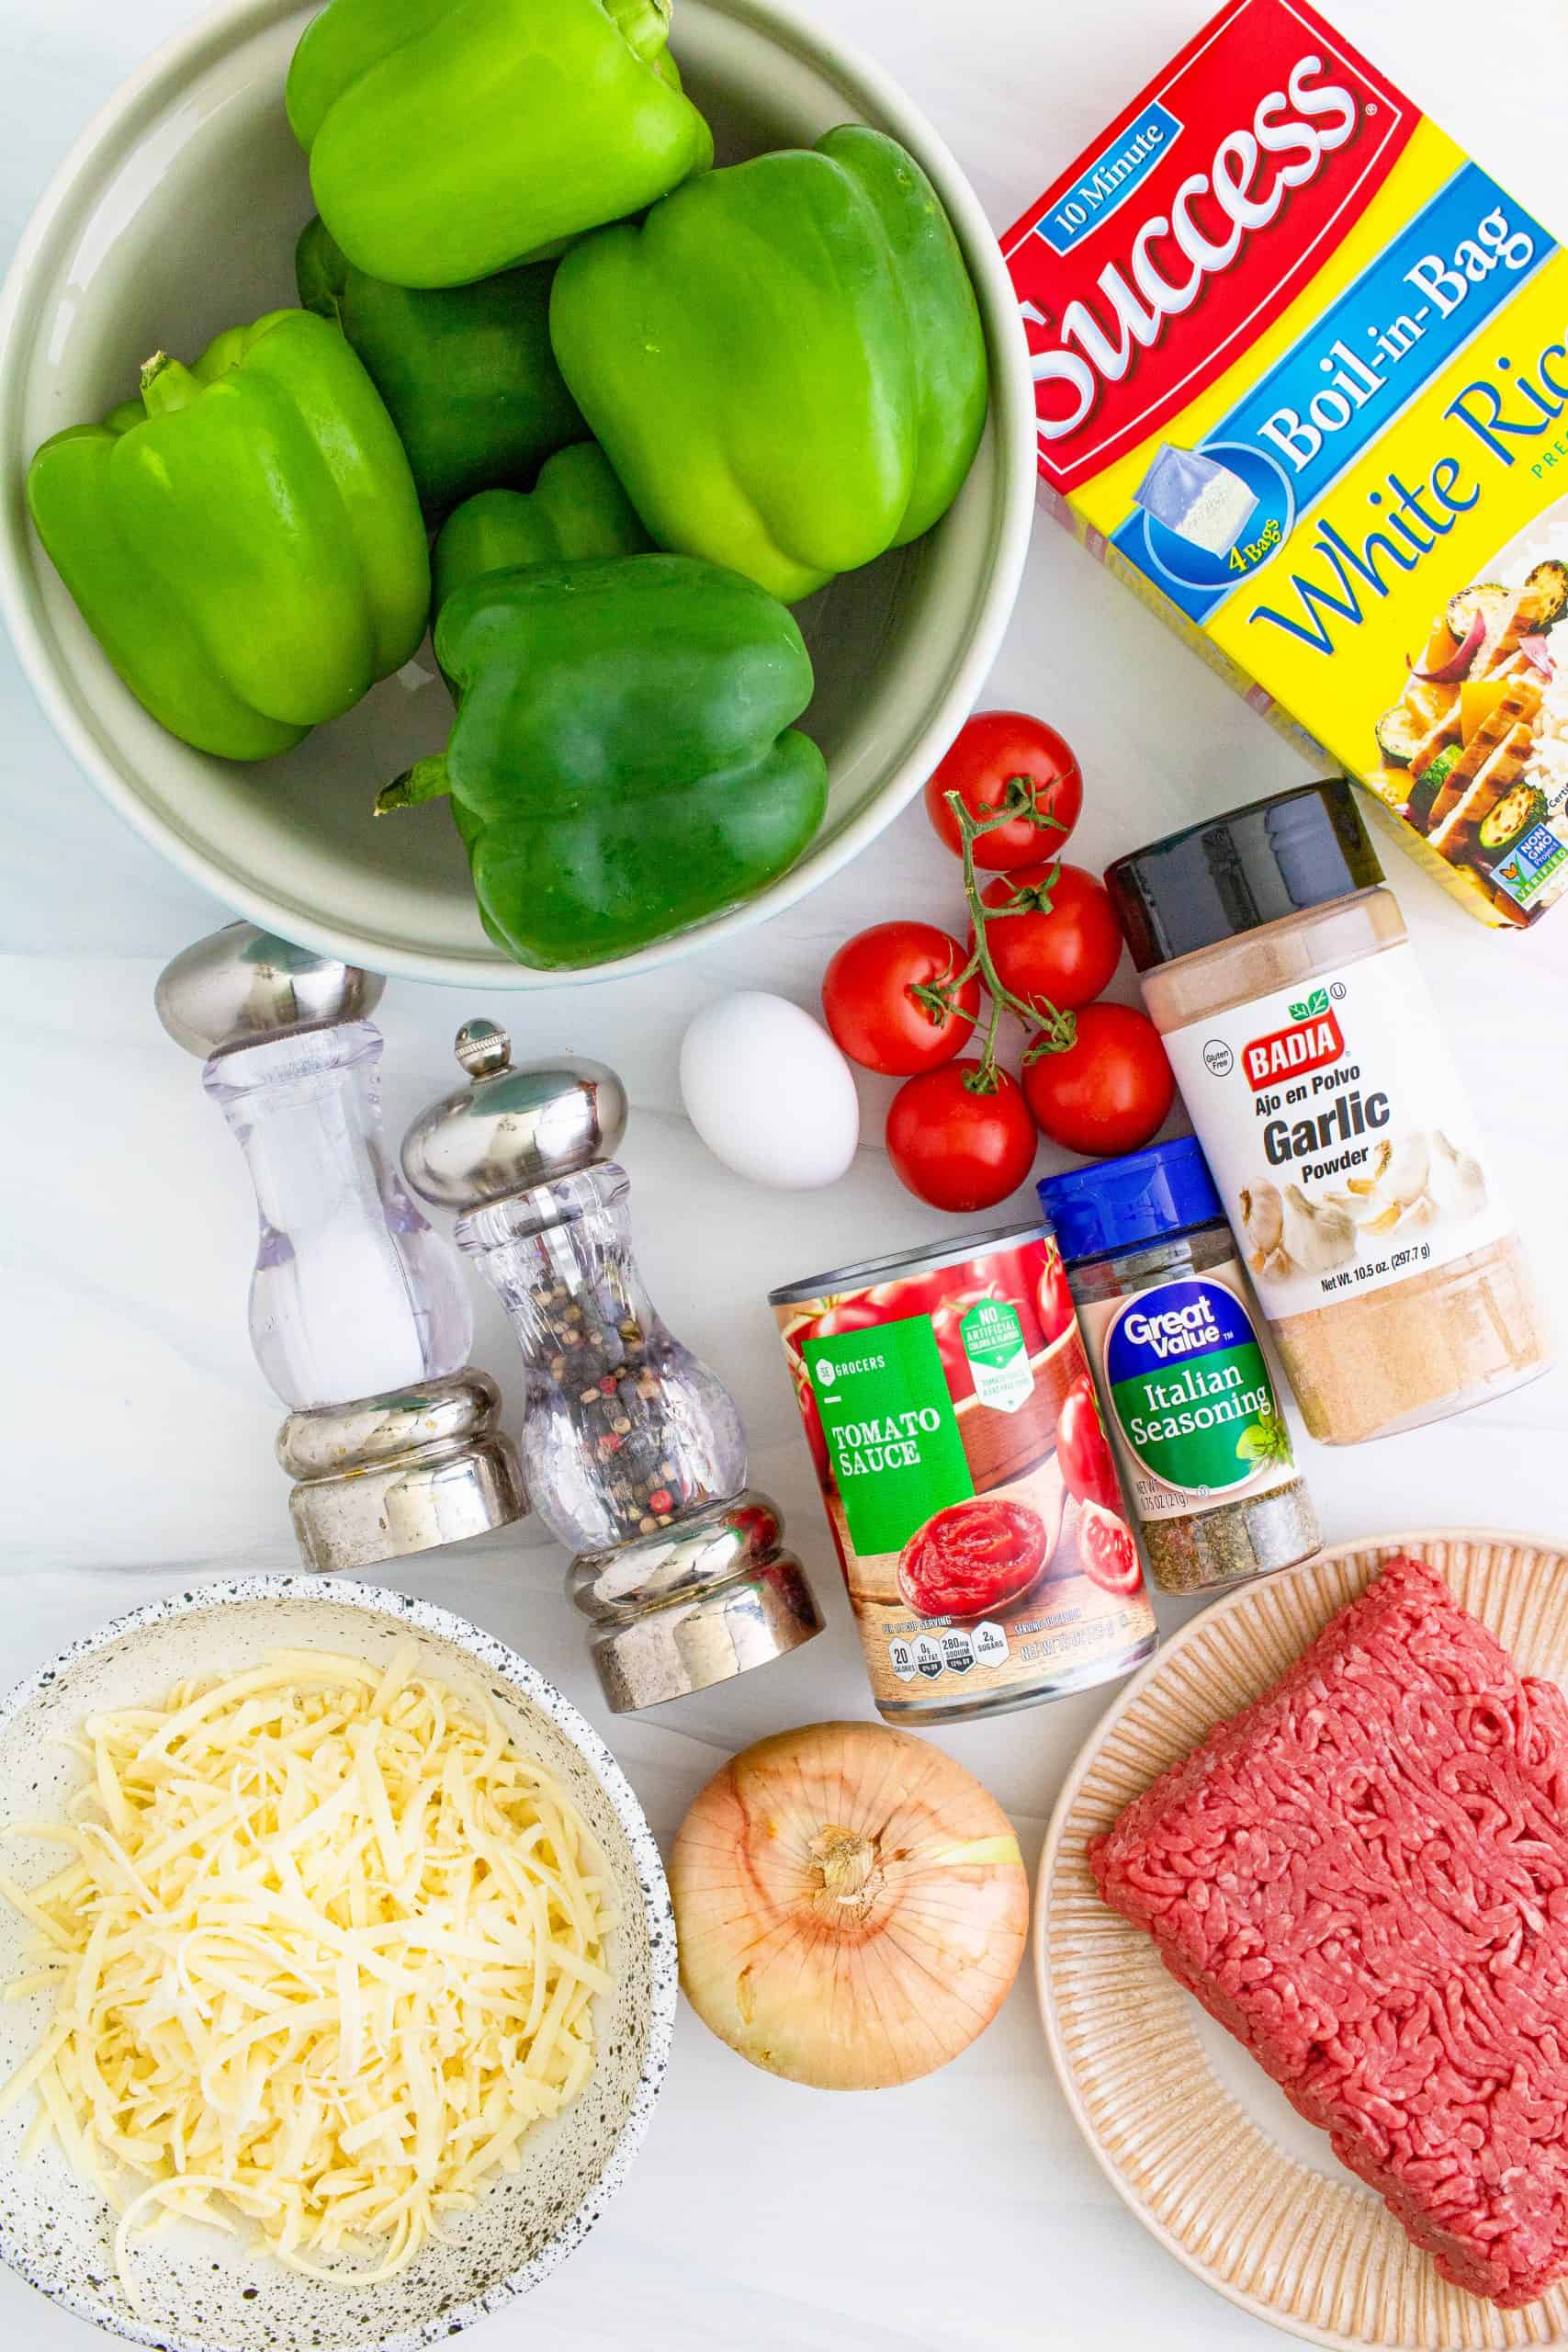 Instant Pot Stuffed Peppers ingredients: green bell peppers, onion, tomatoes, extra lean ground beef, boil-in-bag white rice, large egg, salt and pepper, Italian seasoning, garlic powder, tomato sauce, shredded mozzarella cheese